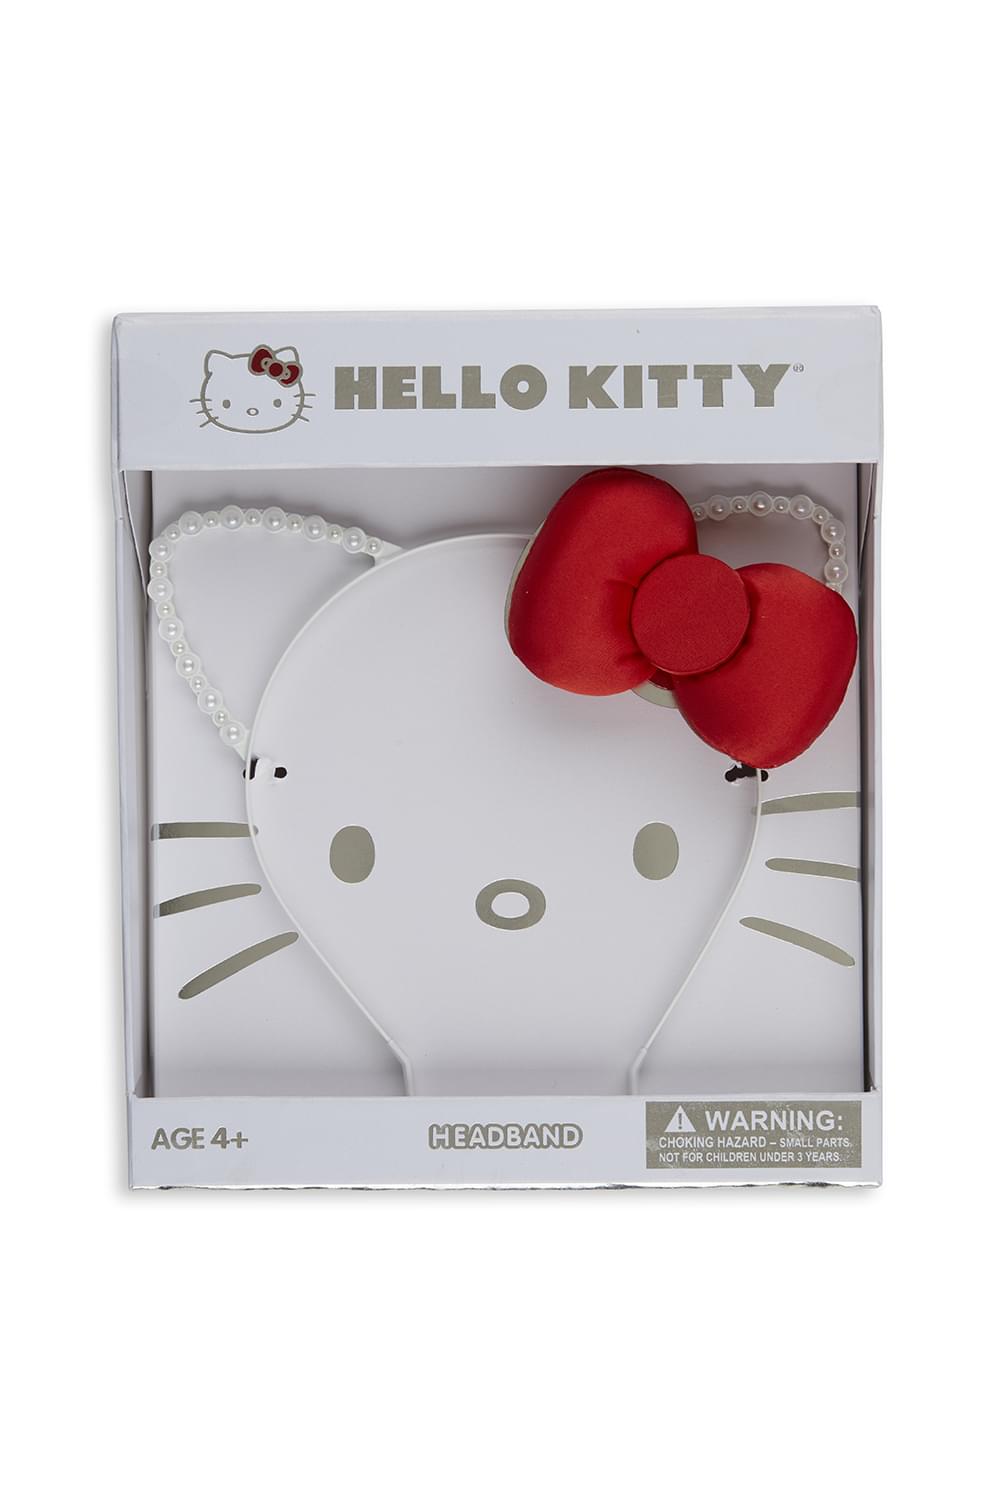 Sanrio Hello Kitty Deluxe White Costume Headband With Red Bow